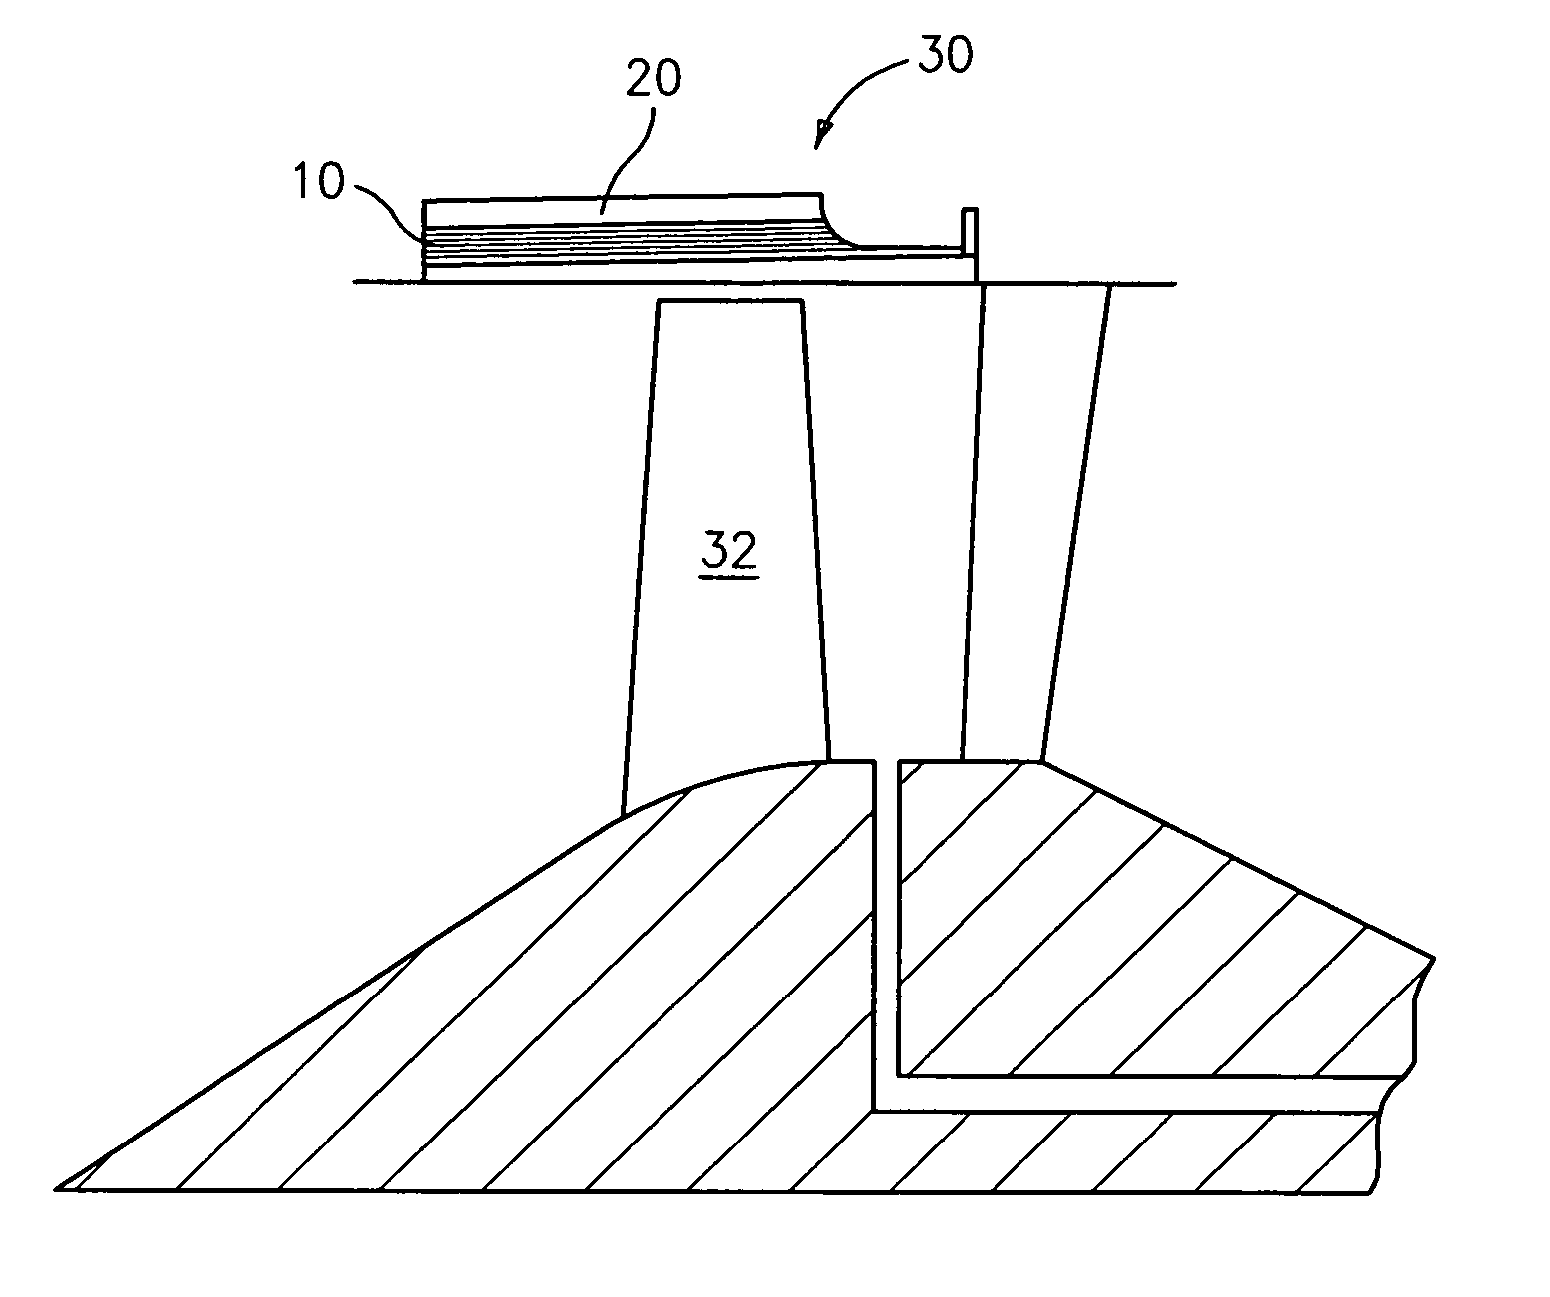 Composite sandwich with improved ballistic toughness